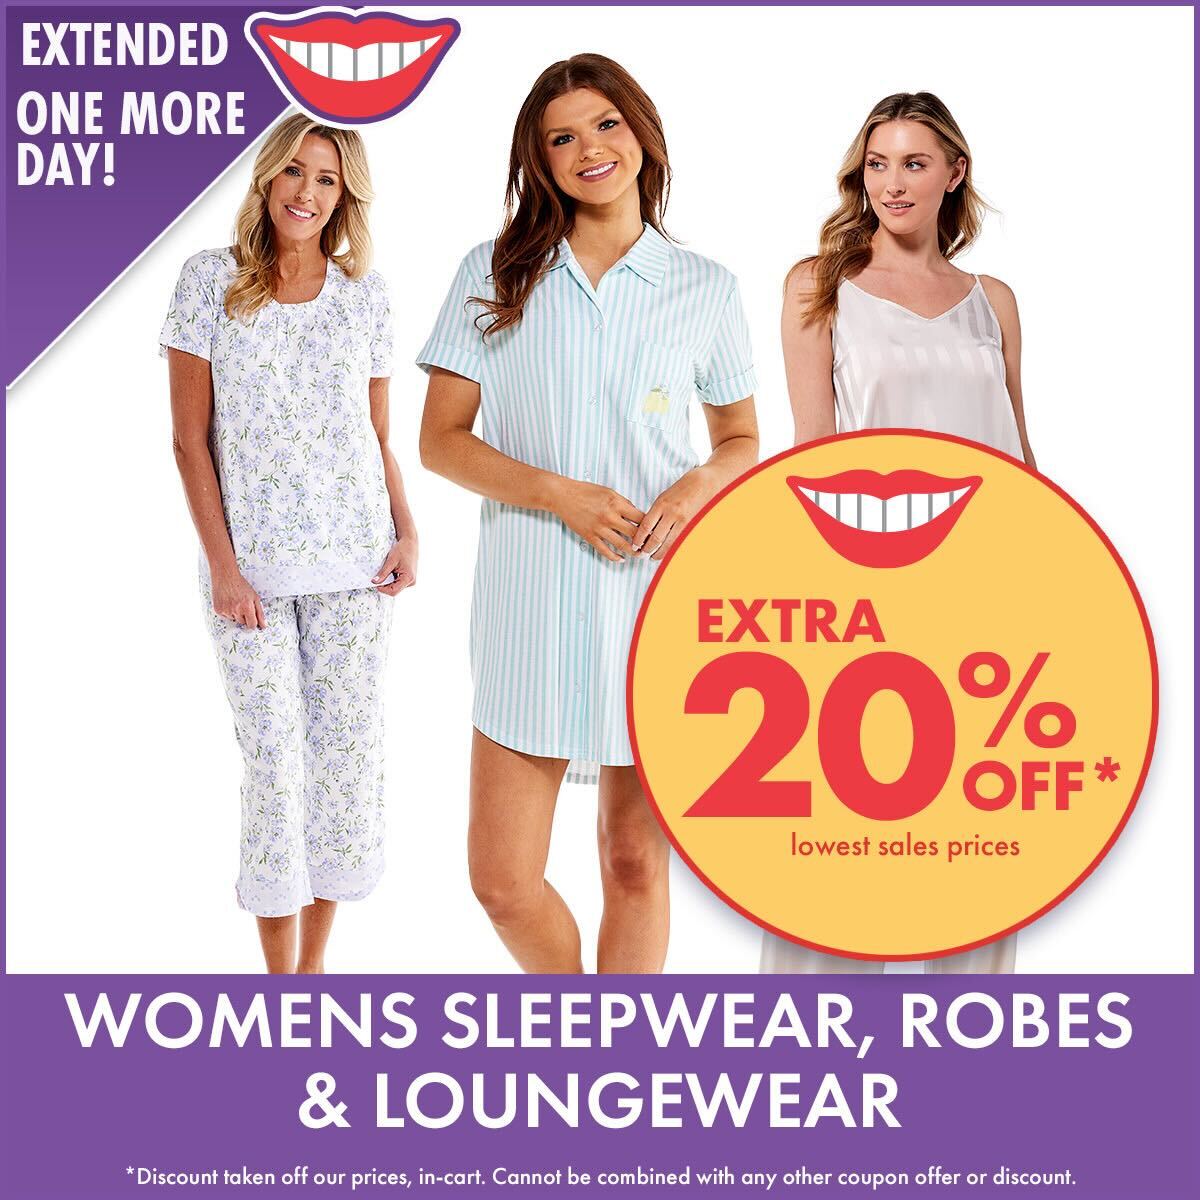 Boscov's - Let your activewear be as stylish as you! Check out our